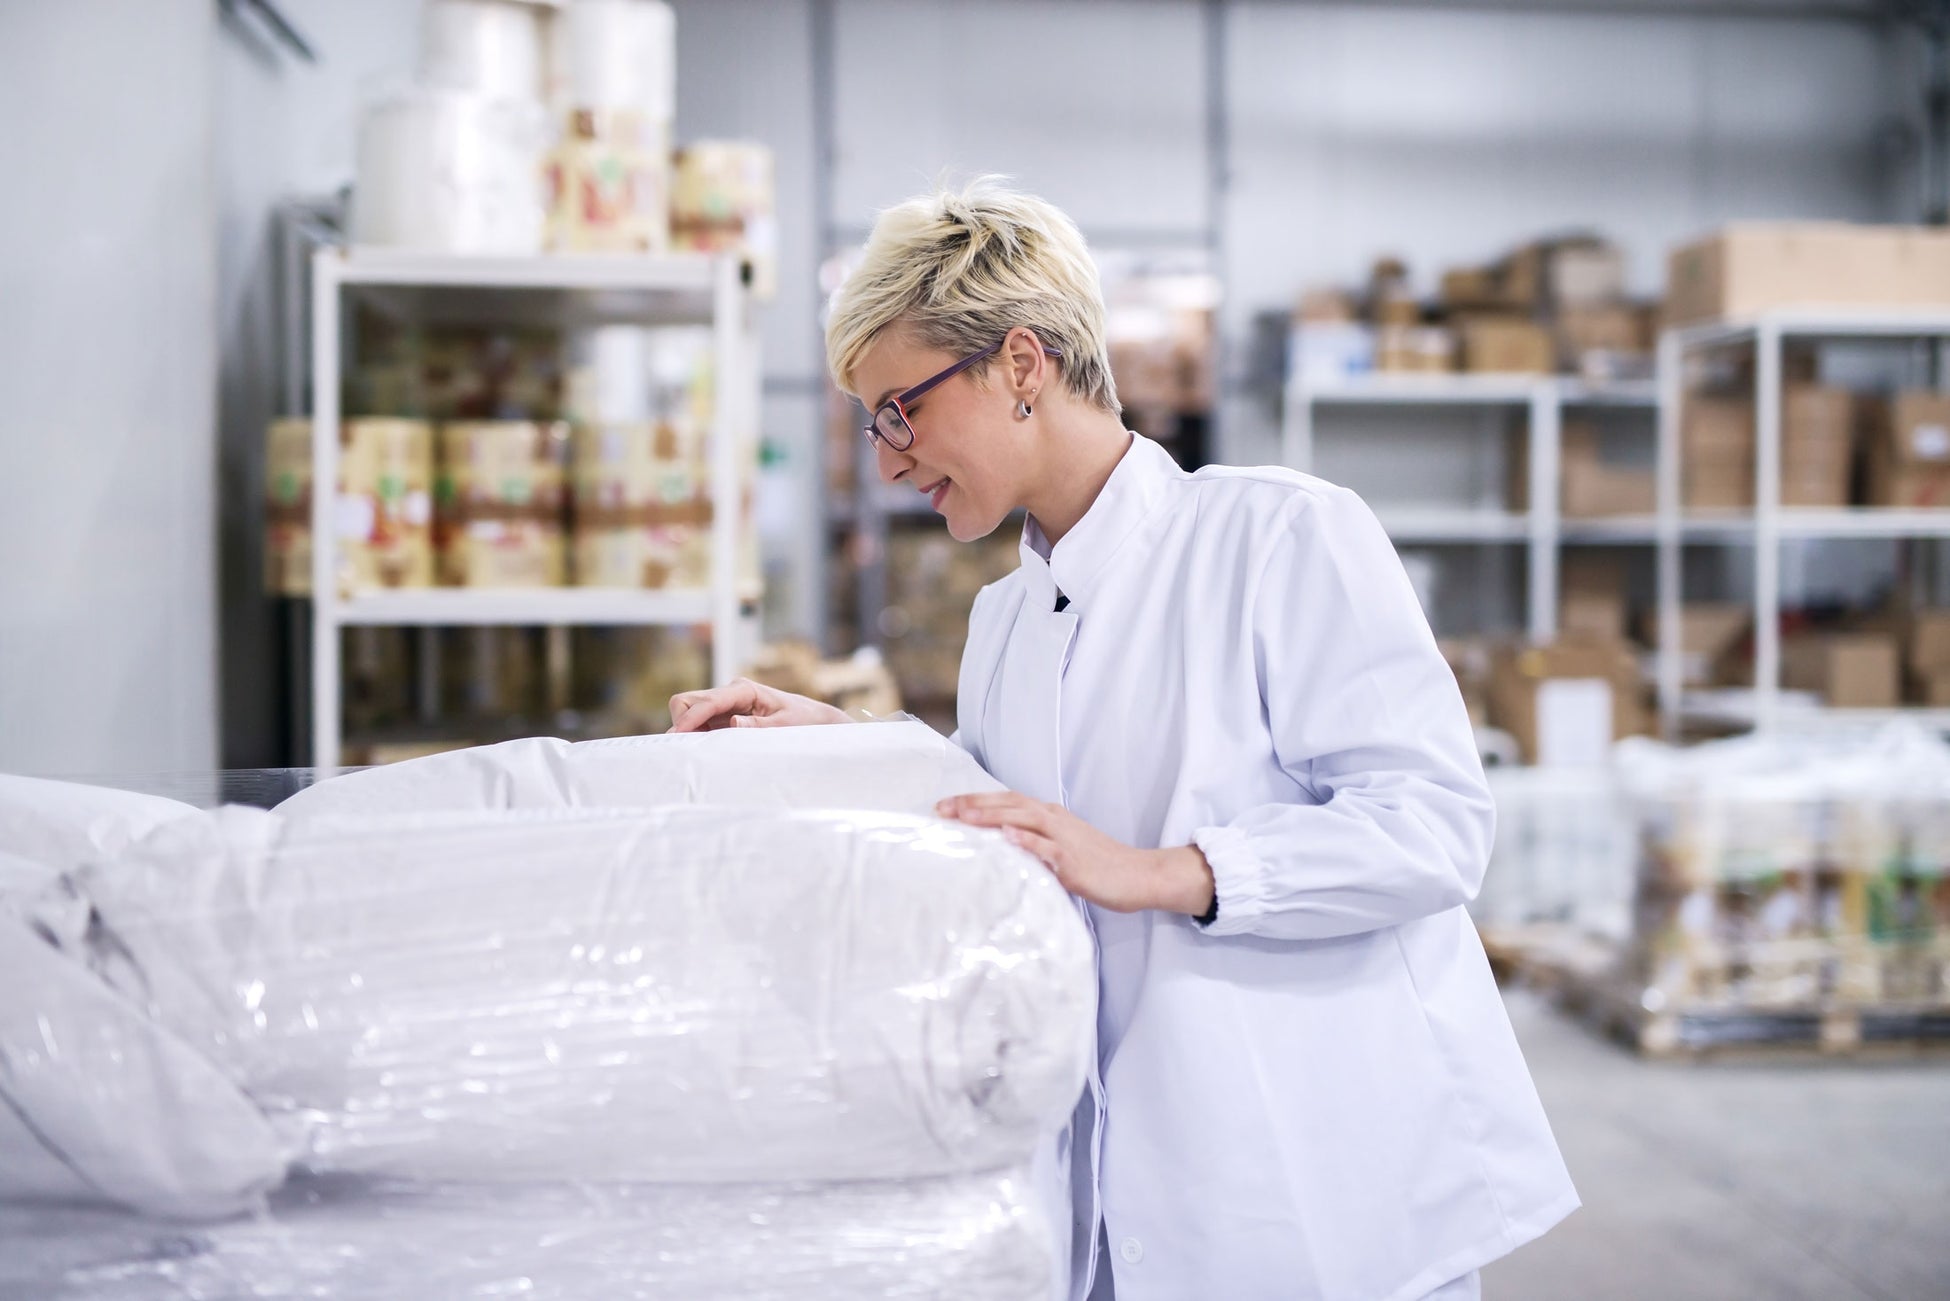 Woman inspecting pallet of wholesale ingredients in warehouse.